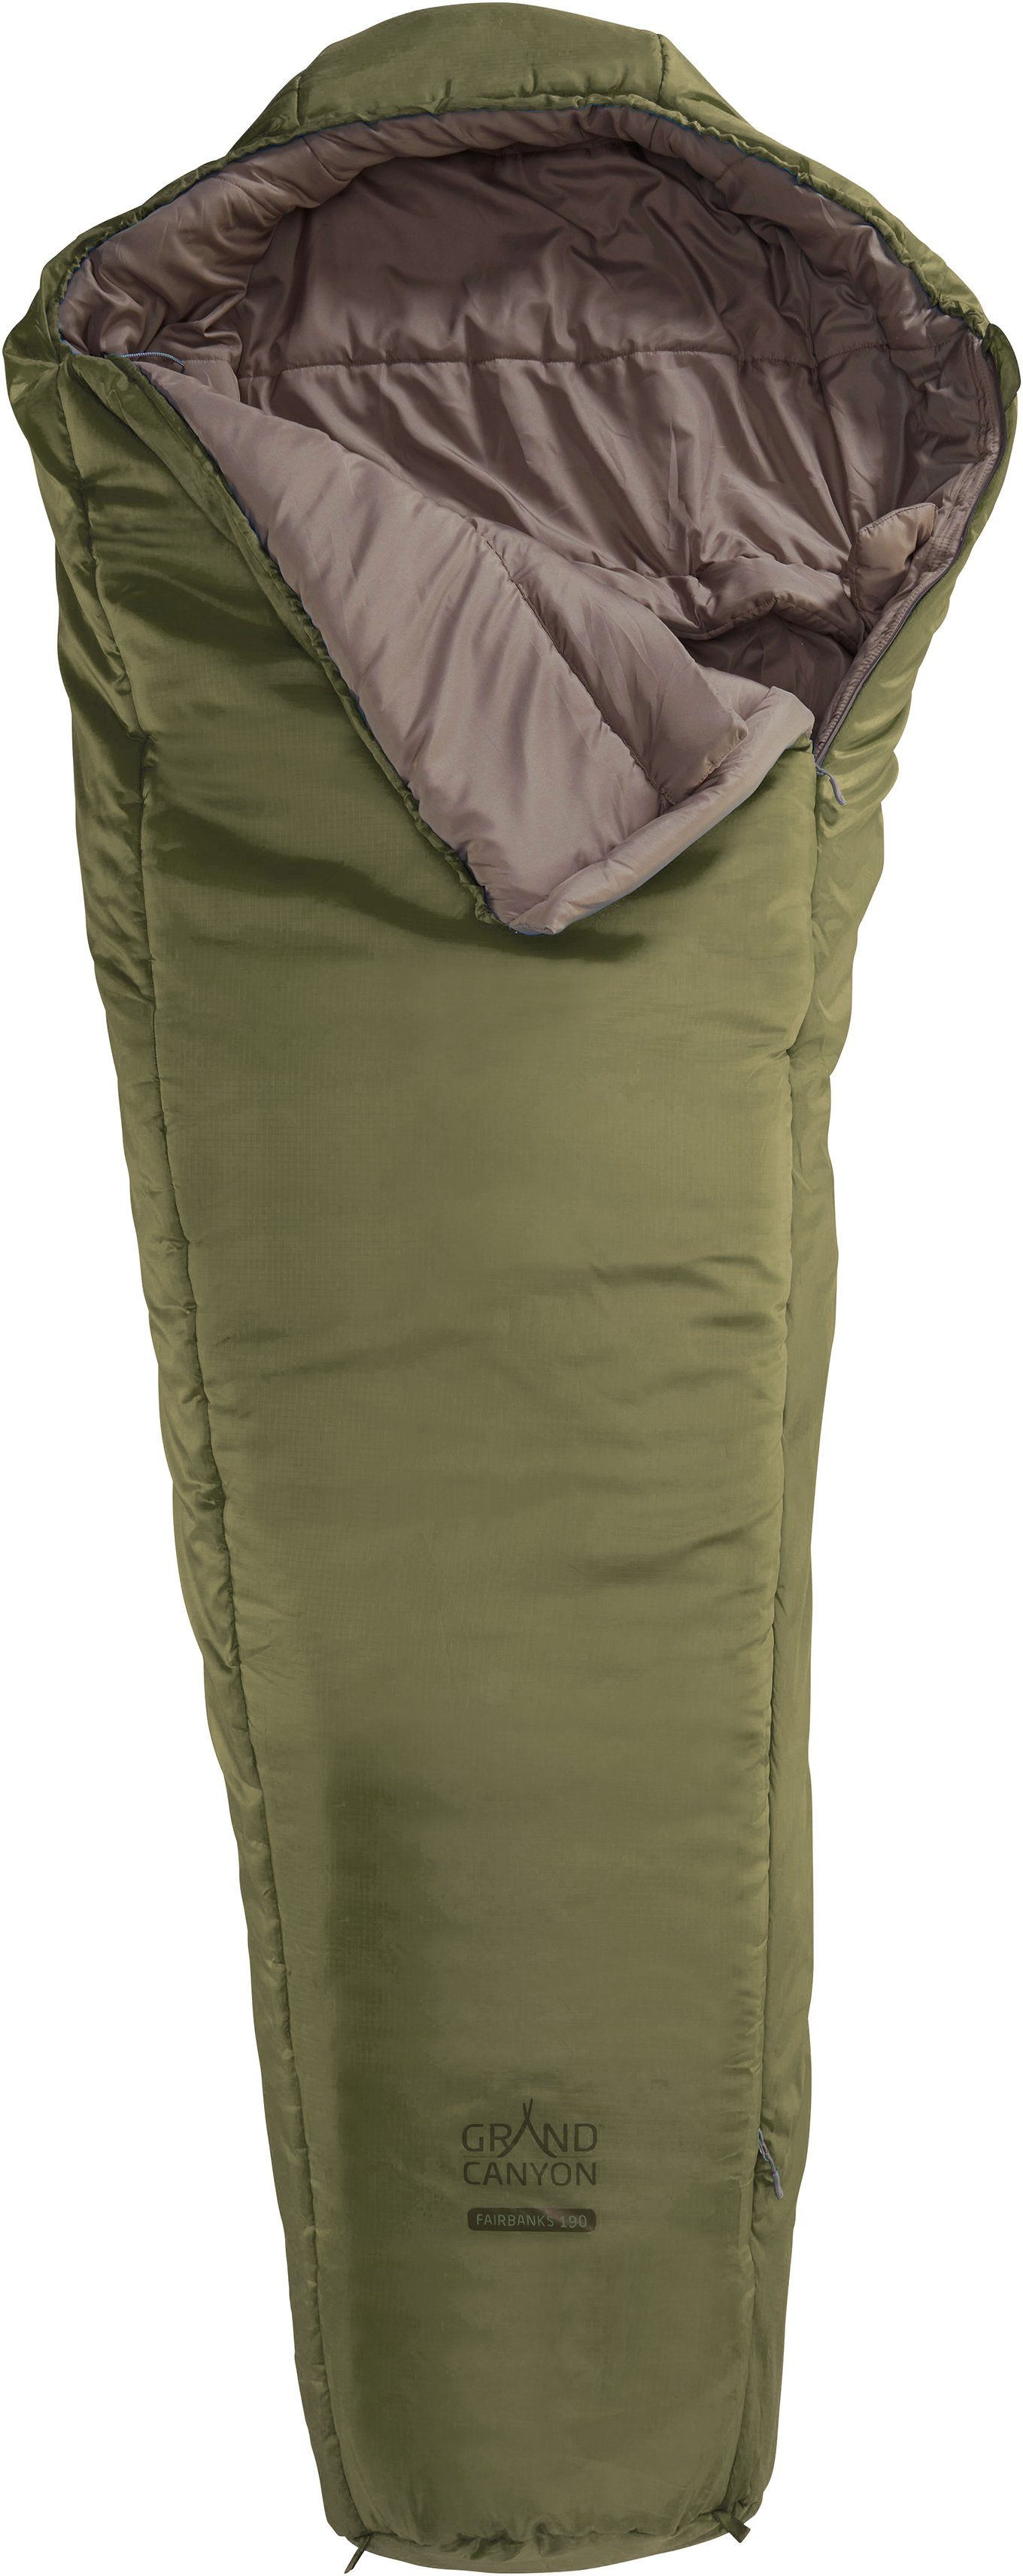 CANYON FAIRBANKS GRAND tlg) Capulet (2 Olive Mumienschlafsack